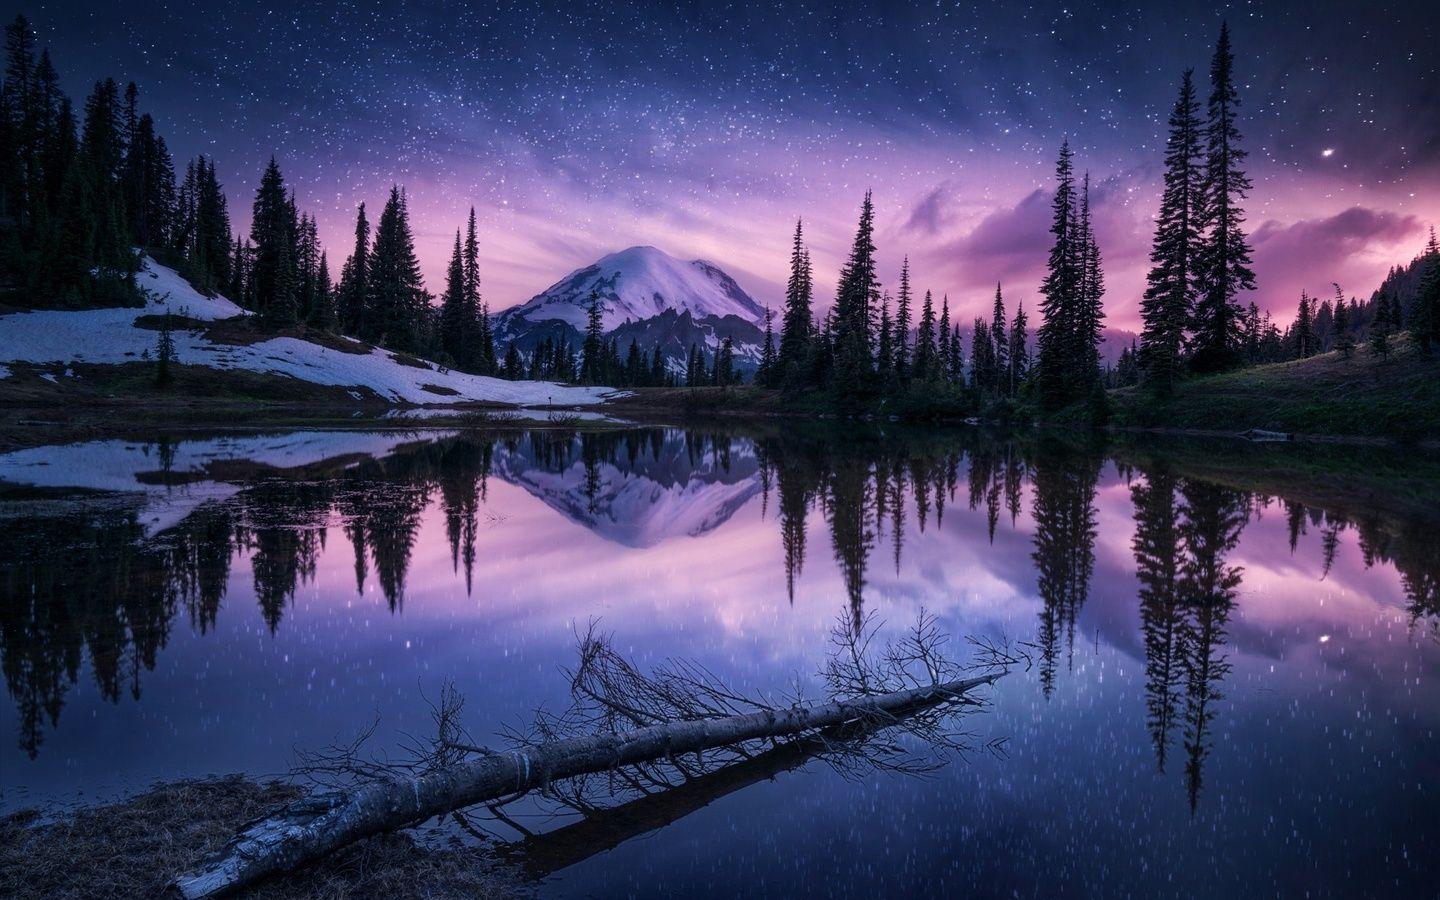 Nature Night Hd Wallpapers - Top Free Nature Night Hd Backgrounds